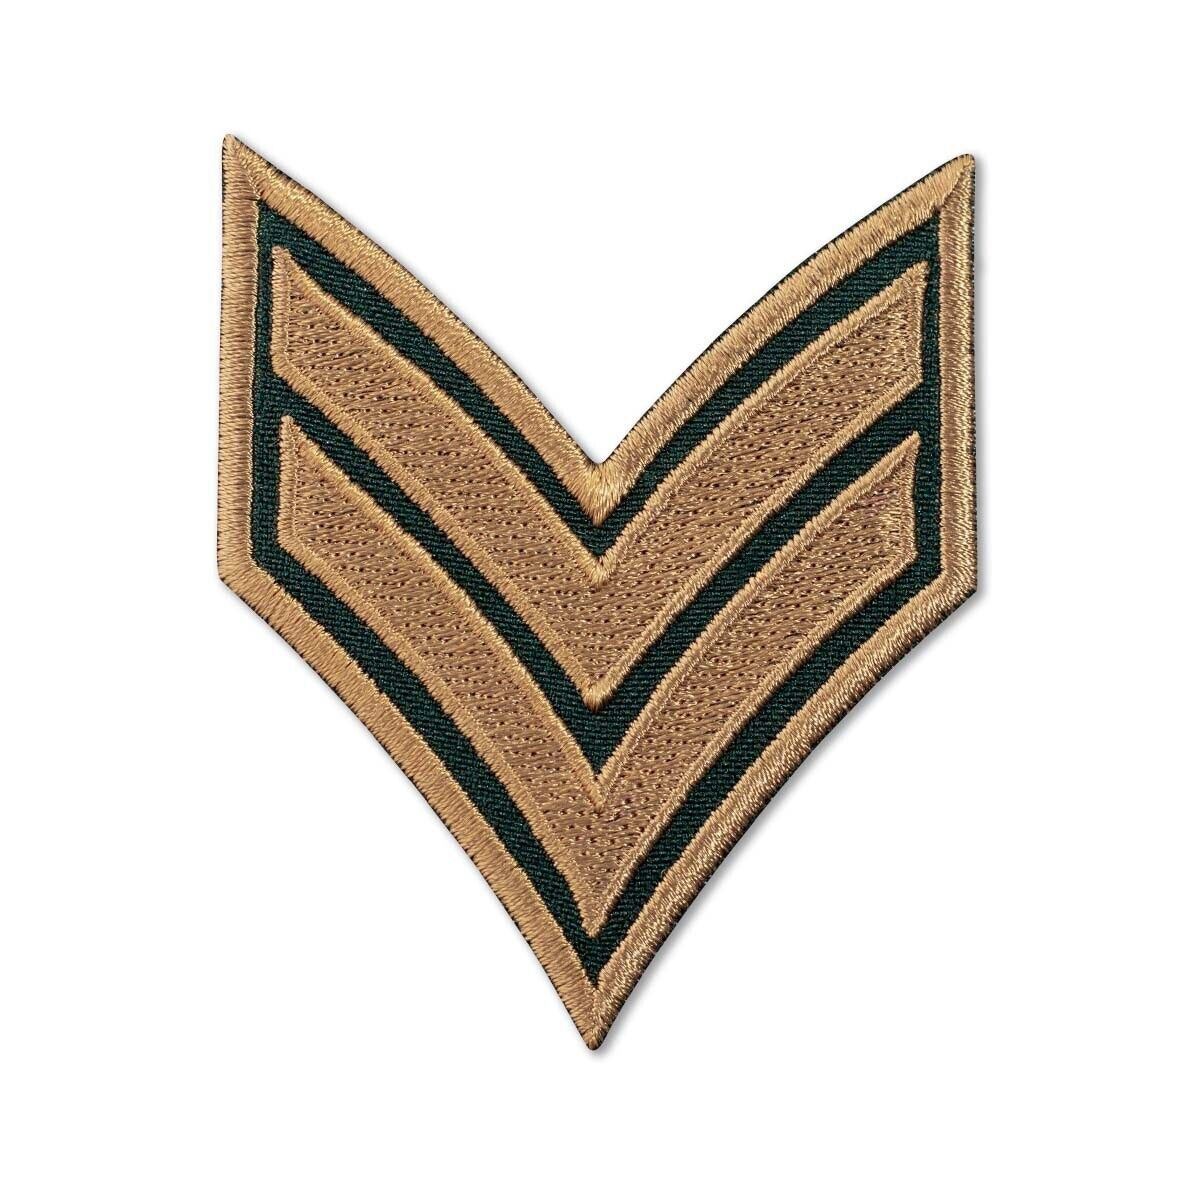 Embroidered Us Army Rank Sew on Patches, Green Fabric Us Military style Rank Patches, Single Private, Corporal, Sergeant Rank Patches for Jackets